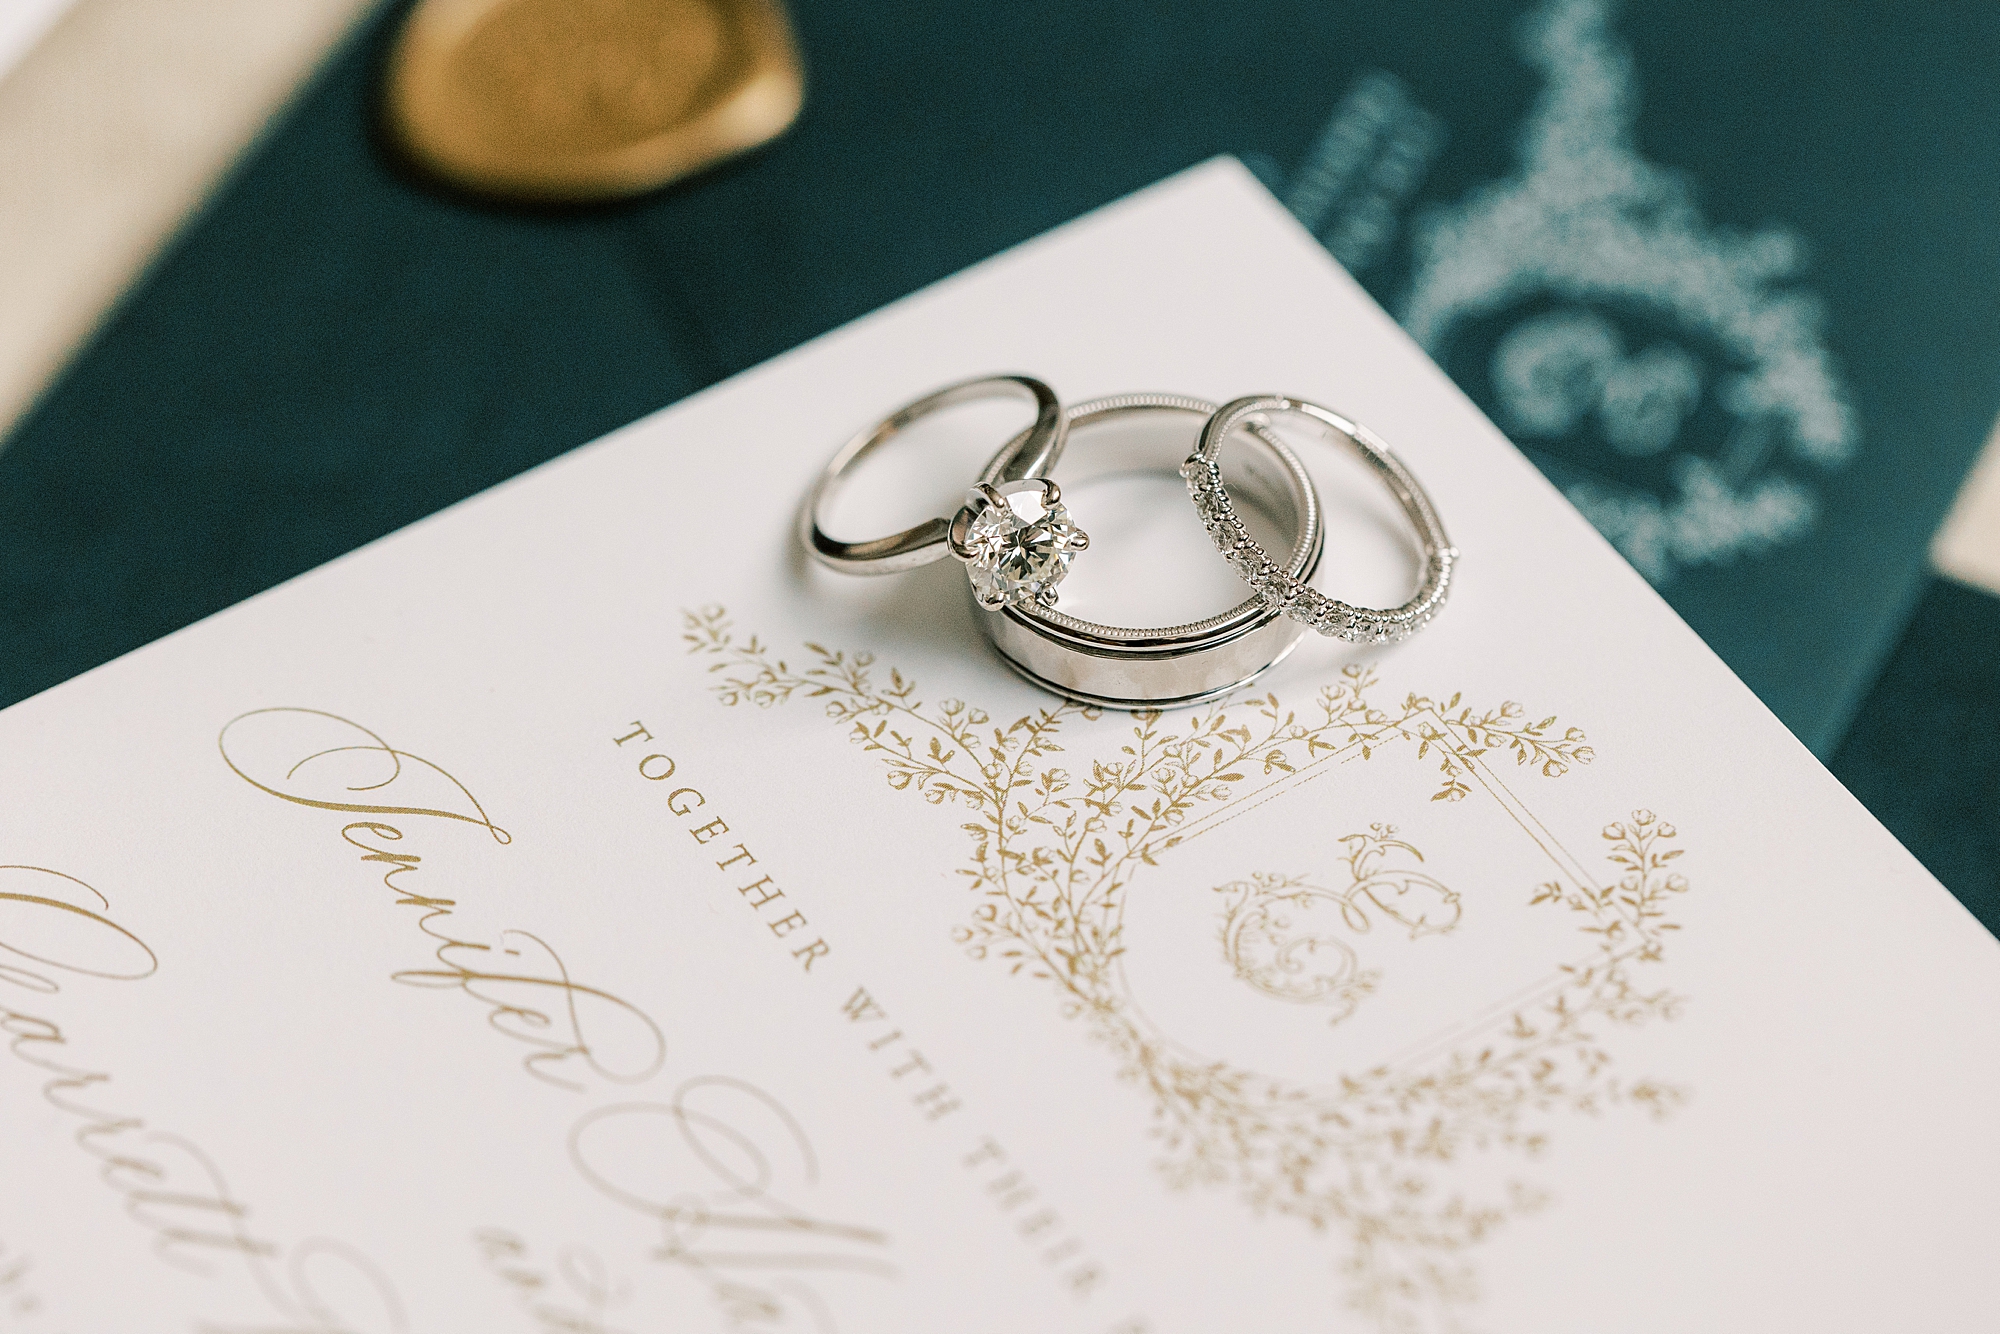 silver wedding rings rest on invitation with custom crest 